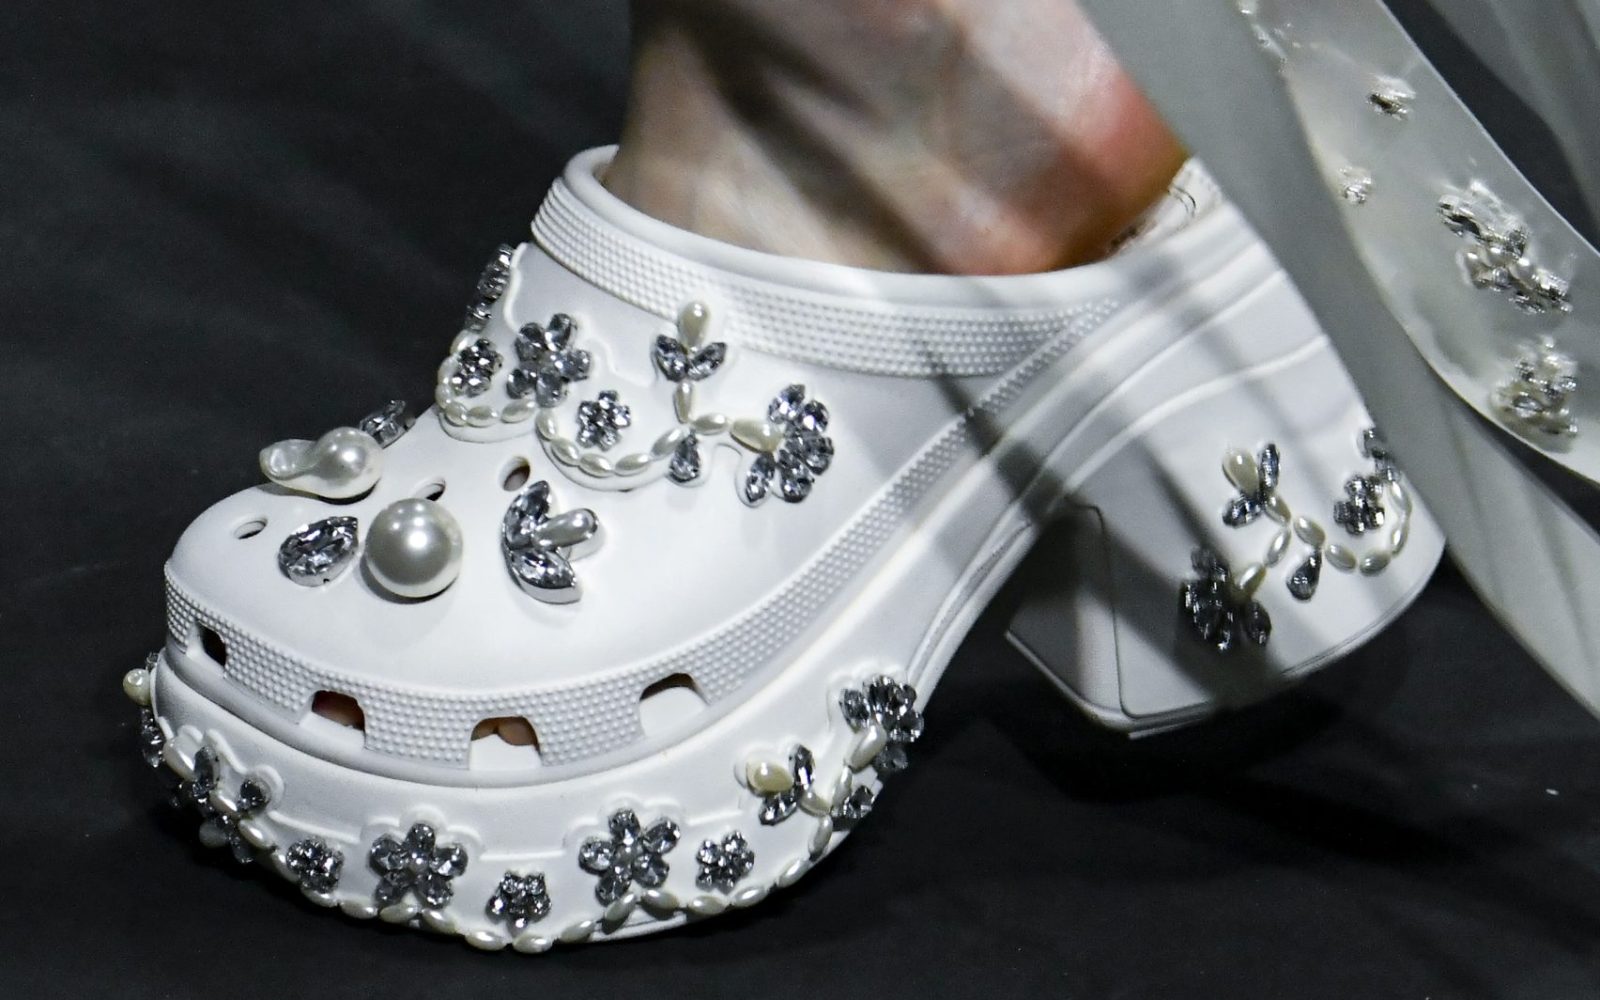 Simone Rocha Is Dropping A Collaboration With Crocs - MOJEH